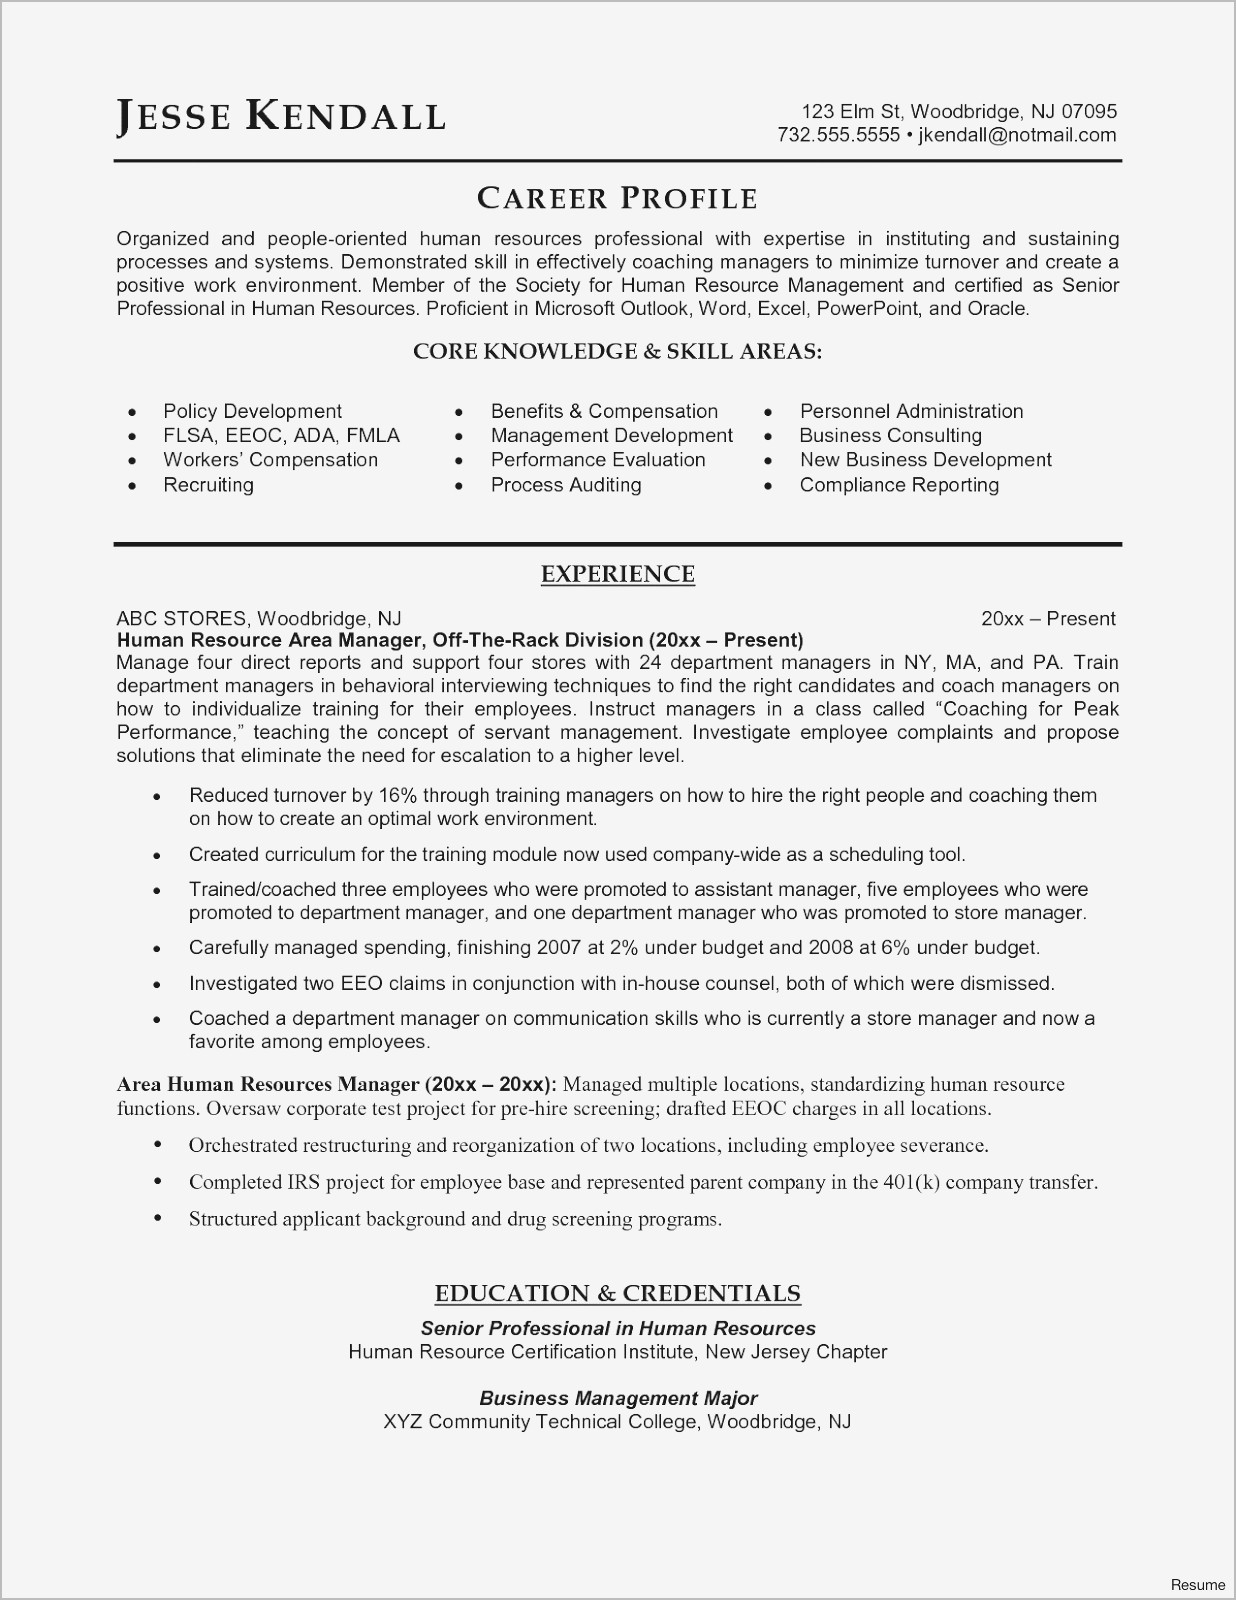 No Show Fee Letter Template - Resume Cover Letter Template Word Ideas